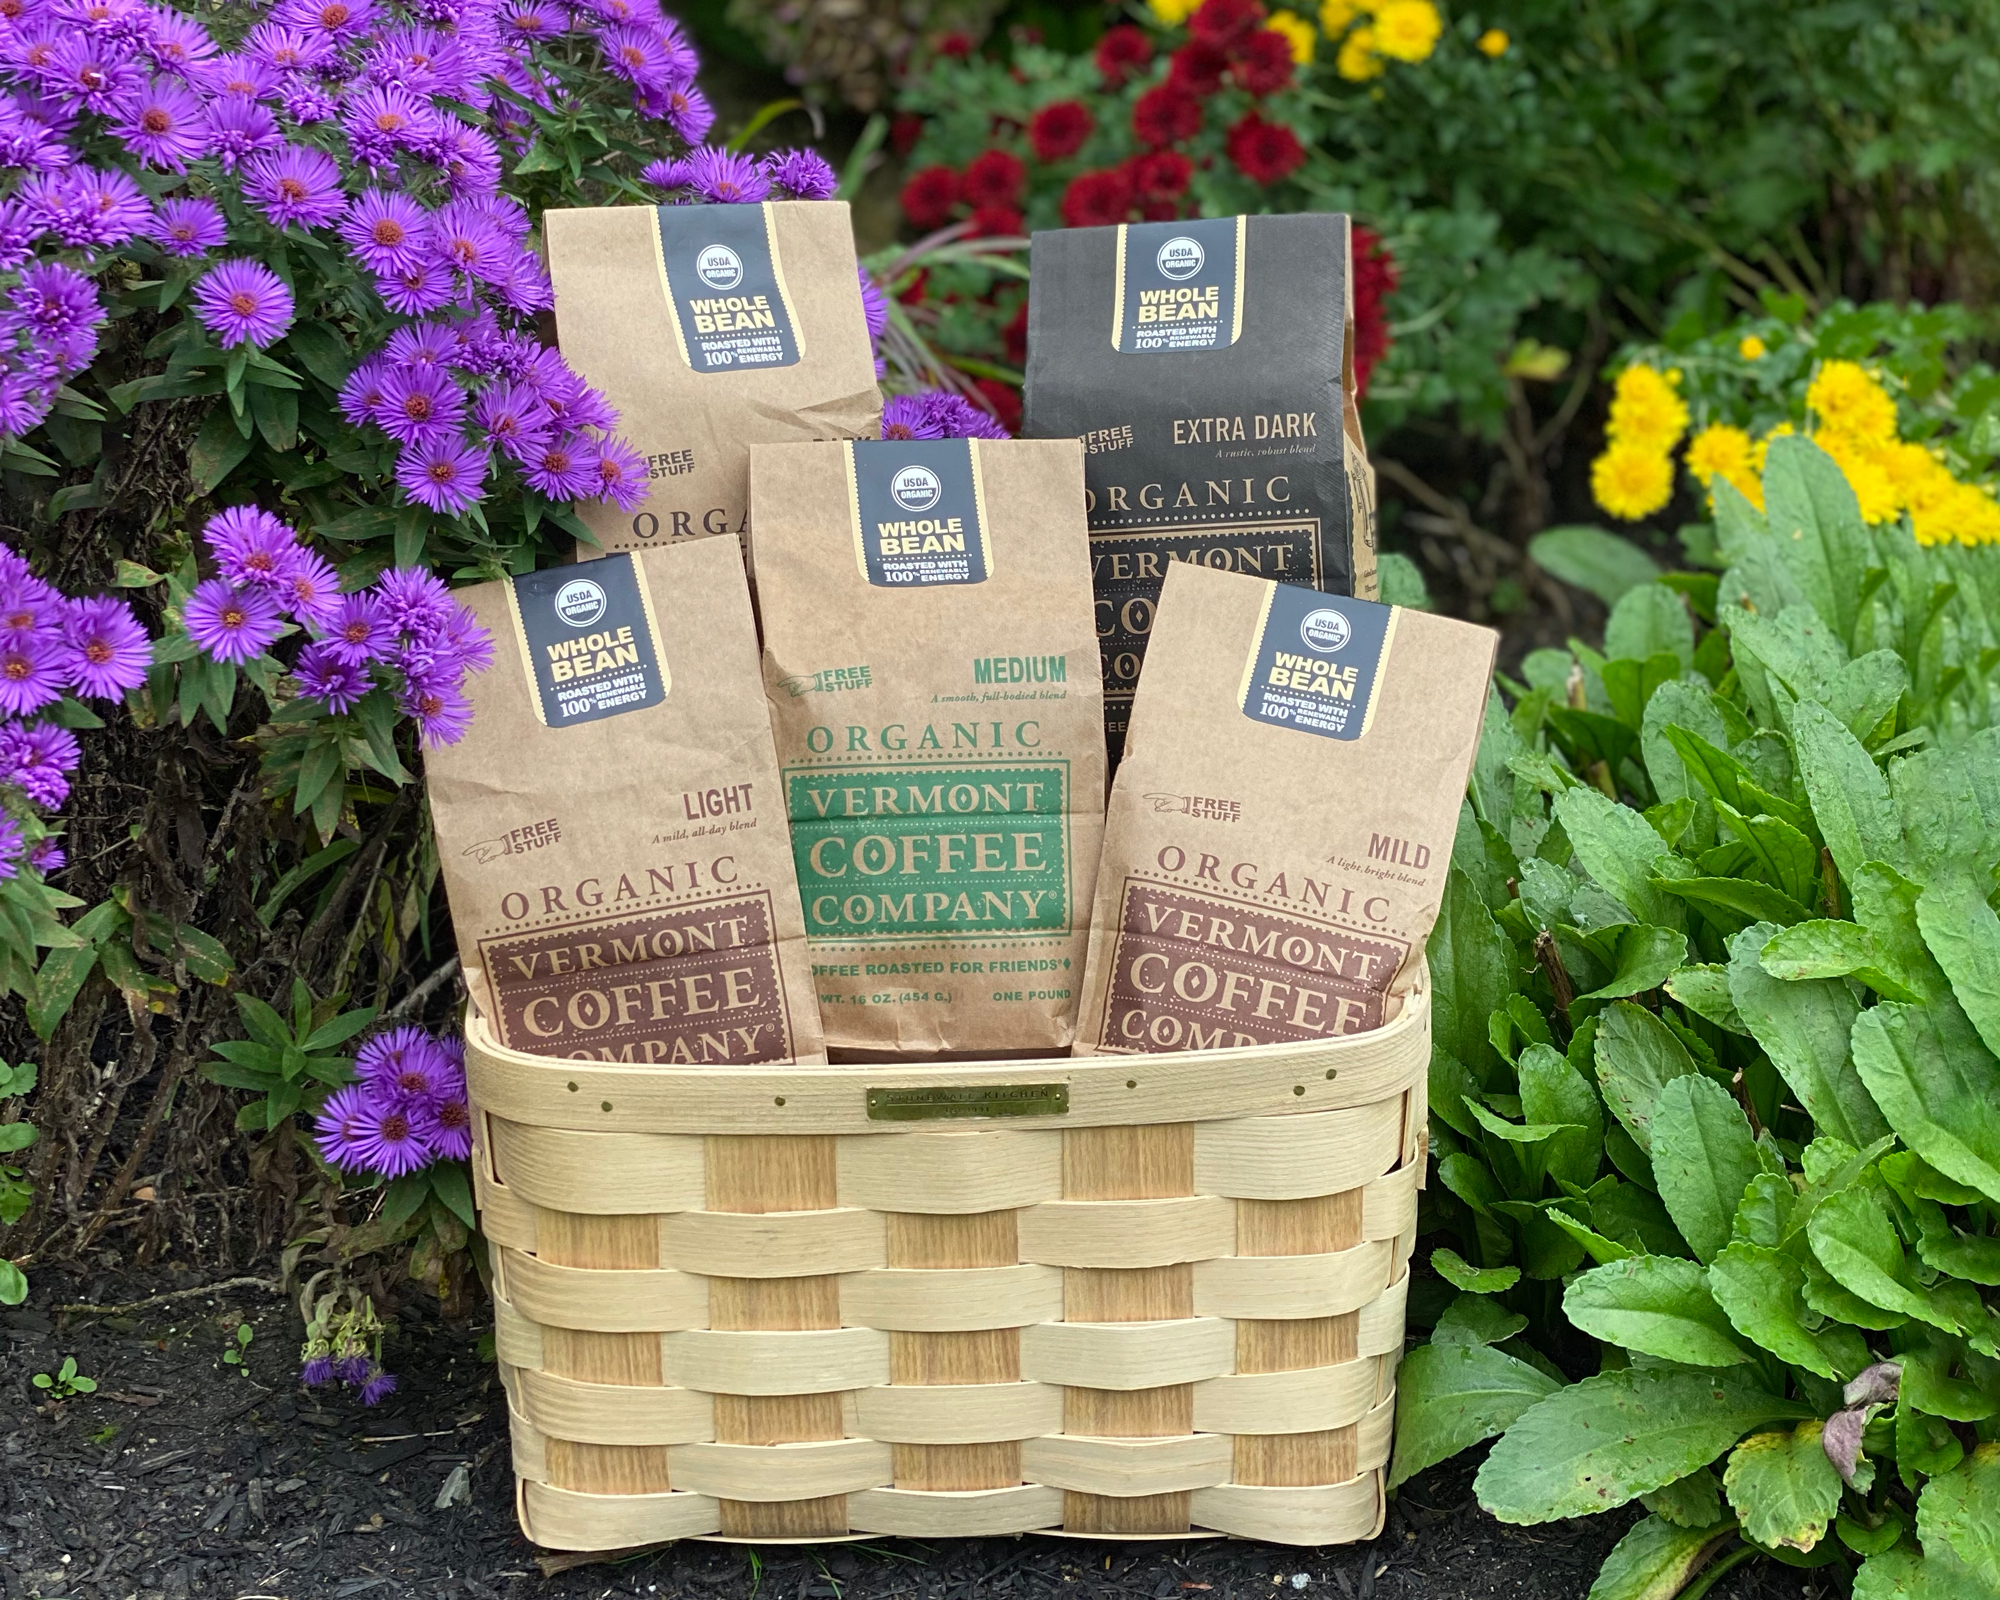 A wicker basket with five bags of Vermont Coffee Company coffee surrounded by flowers